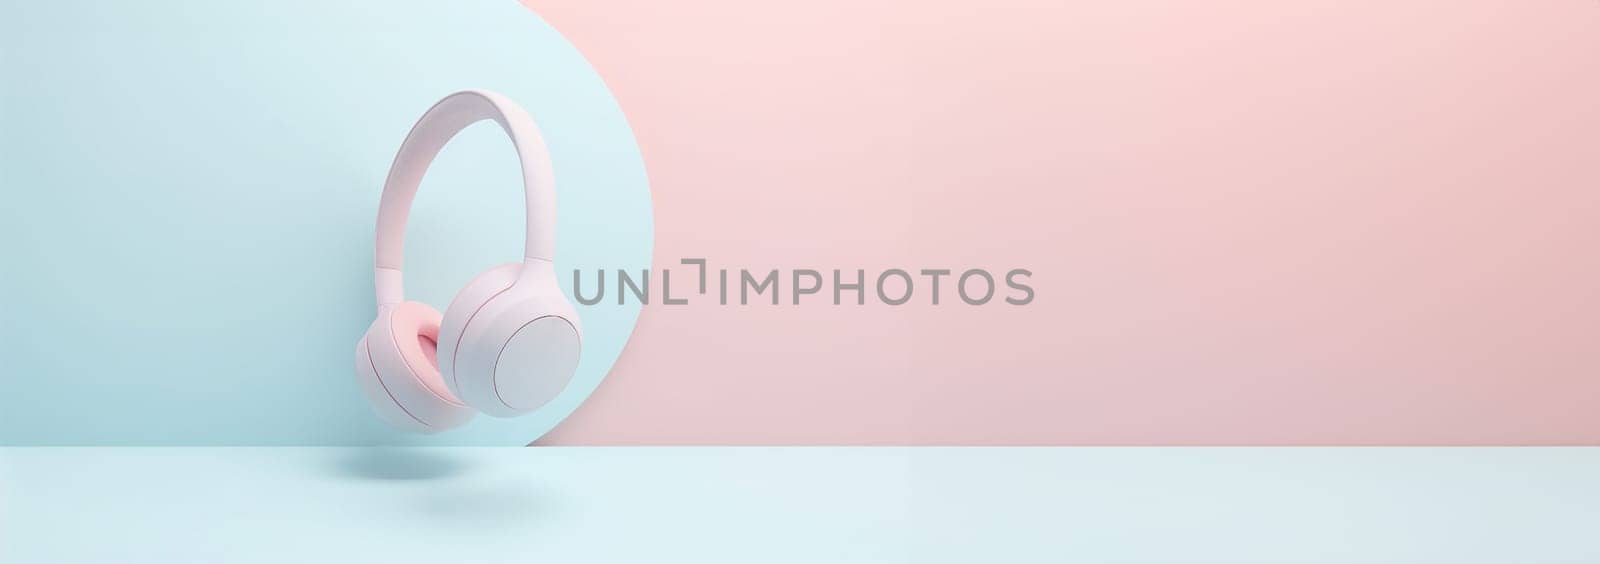 Banner Realistic wireless earphones of trendy color.3d pastel colored background headphone element. Realistic object for music or game concept, poster design, flyer, website. Music audio headphones Copy space by Annebel146